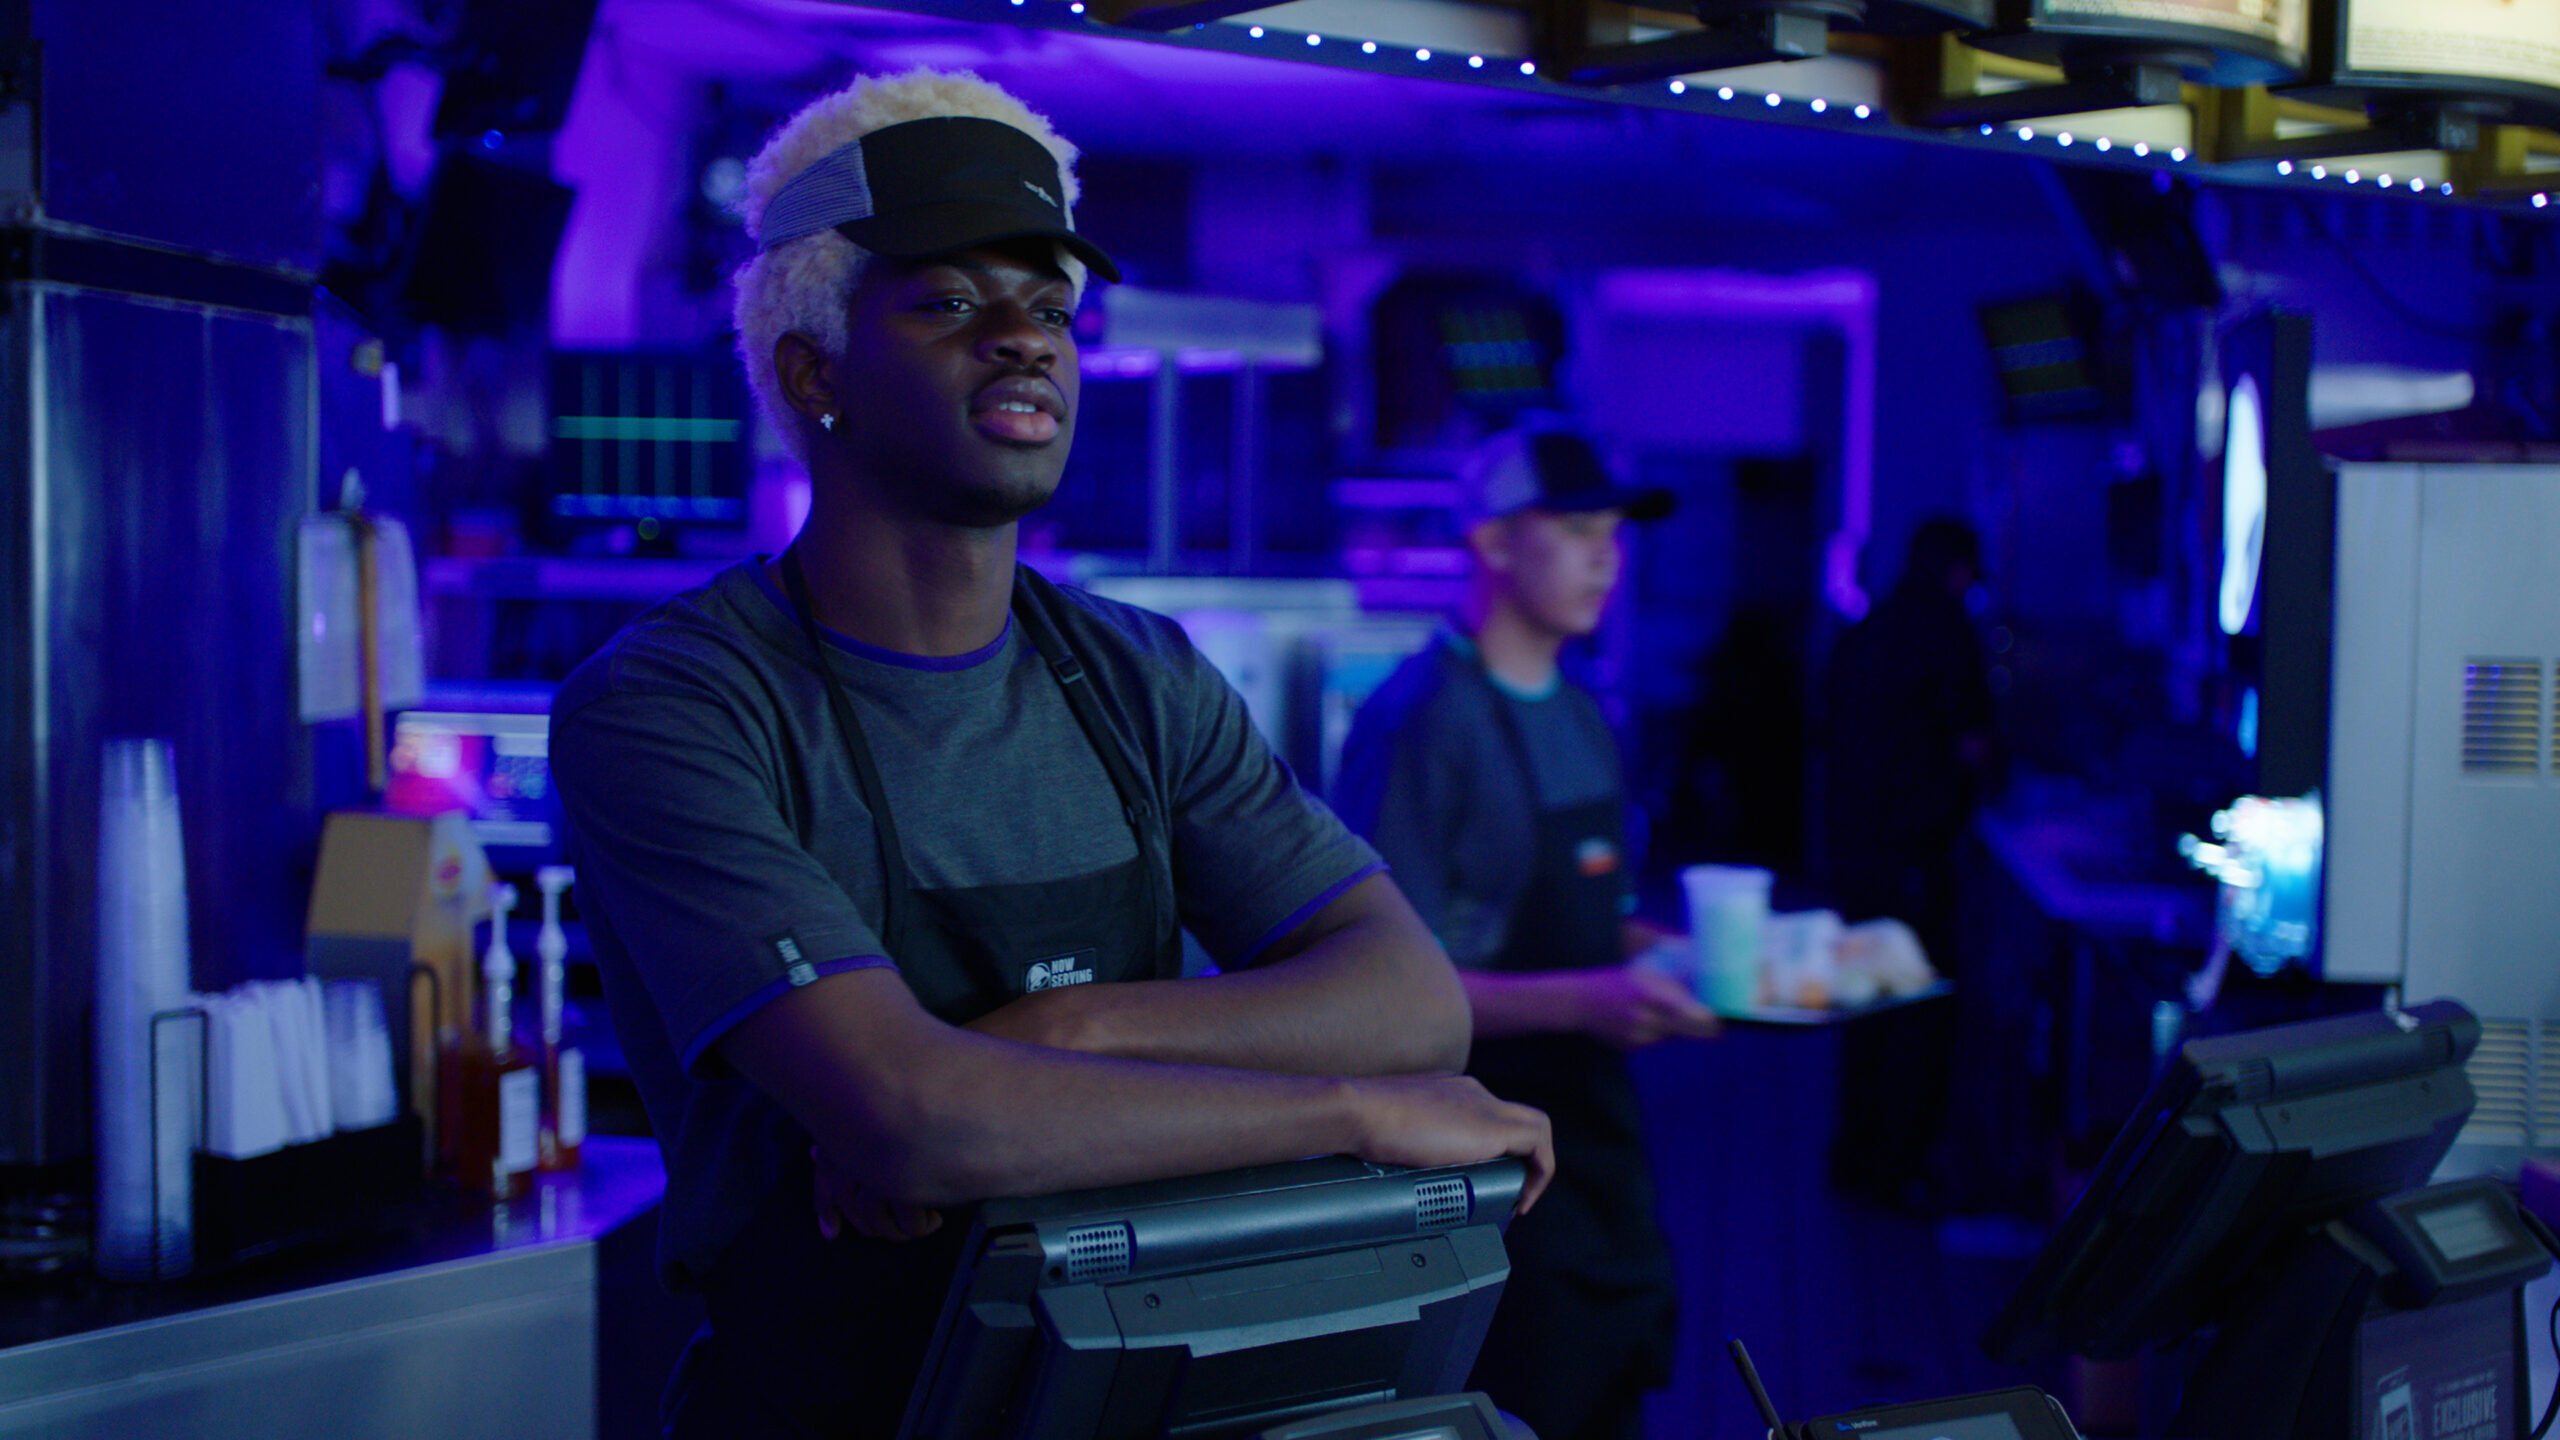 Lil Nas X portraying his teenage self, working at a Taco Bell in the music video "Sun Goes Down."